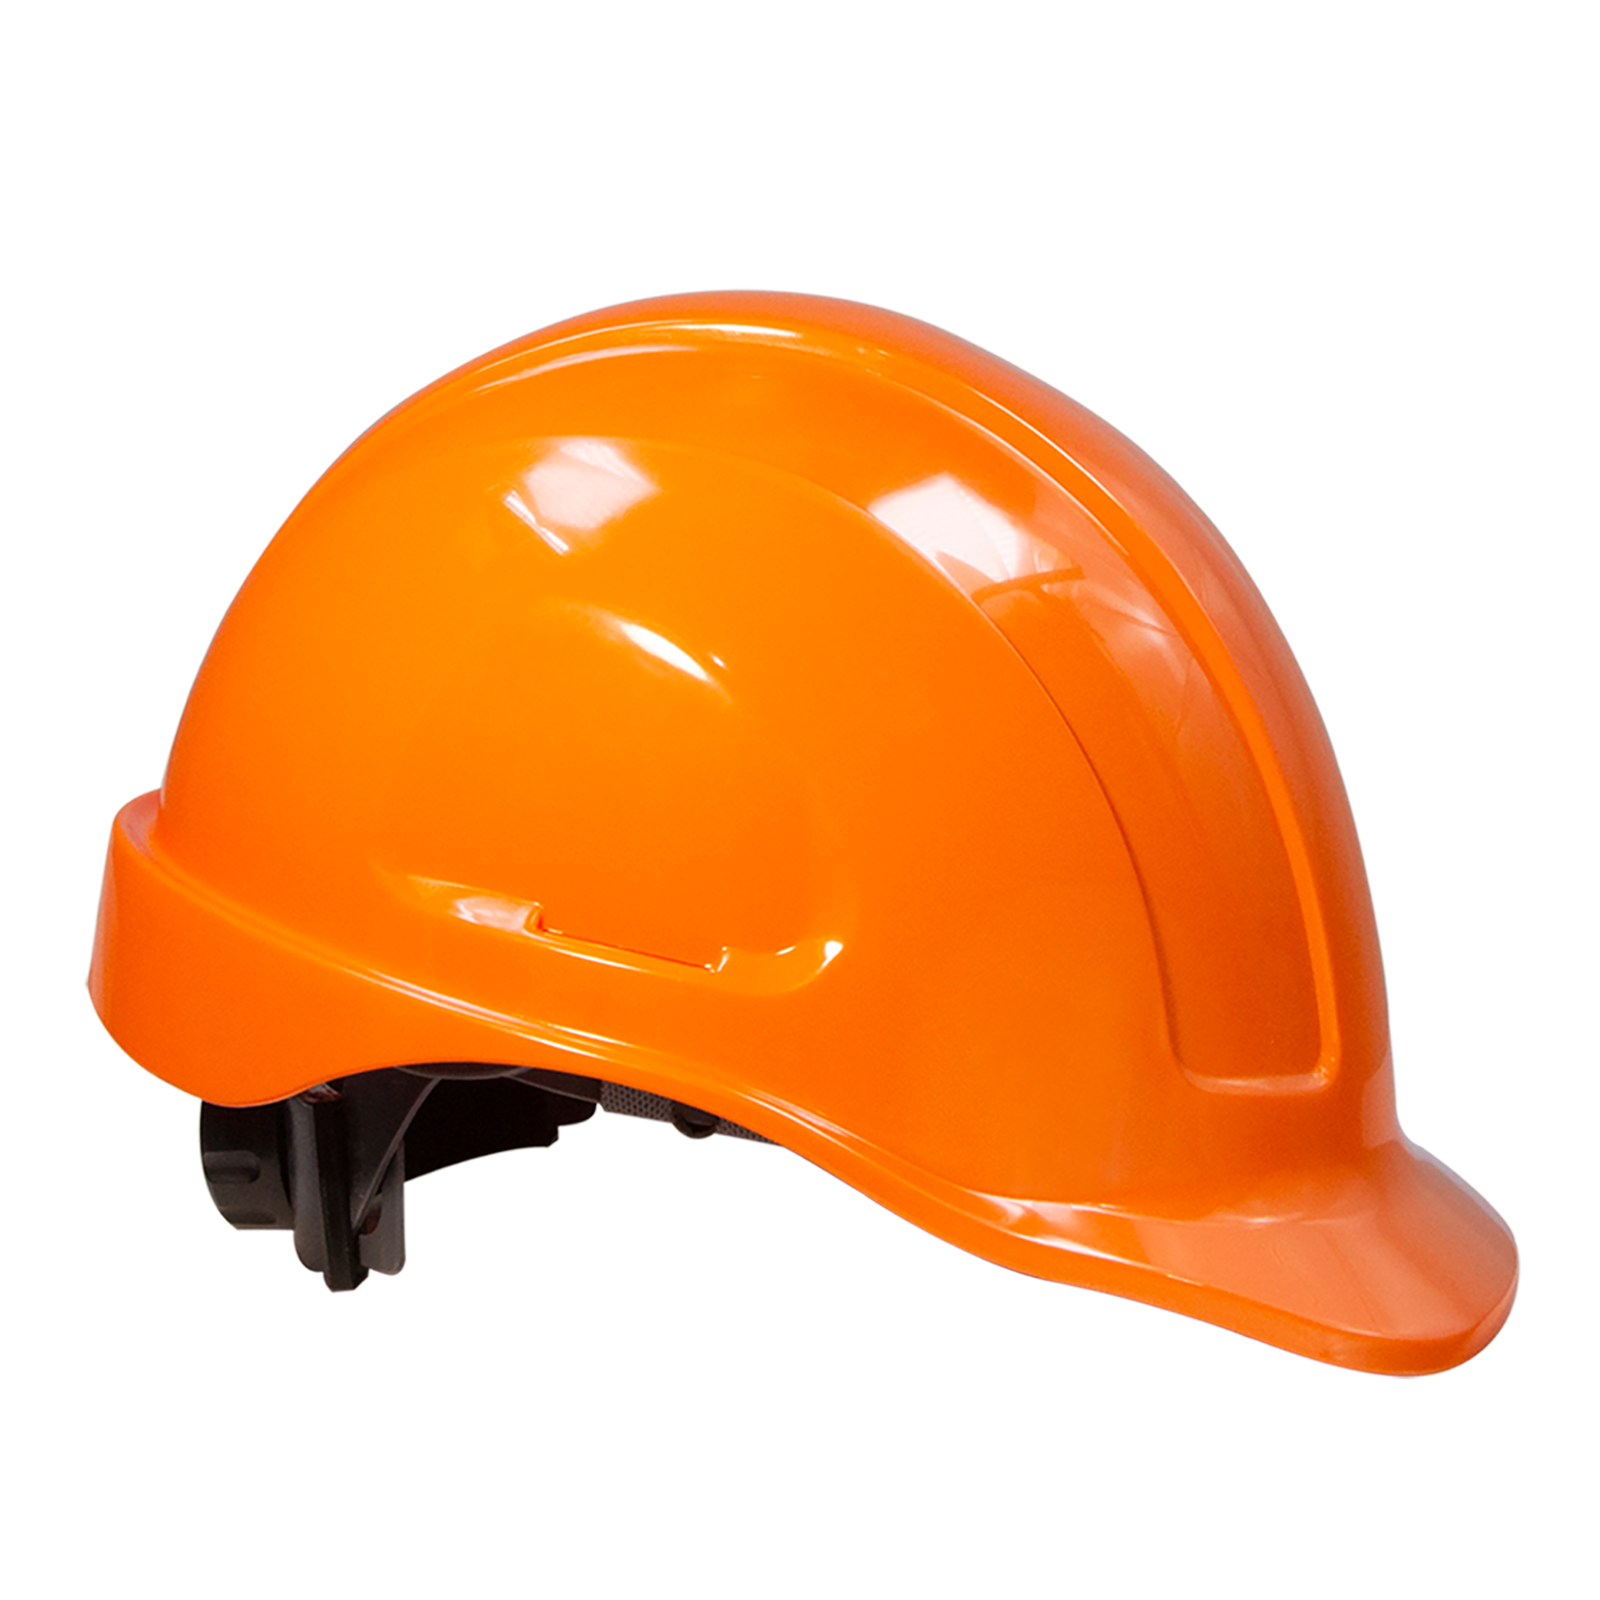 Orange hard hat with slots compatible with JORESTECH Earmuffs